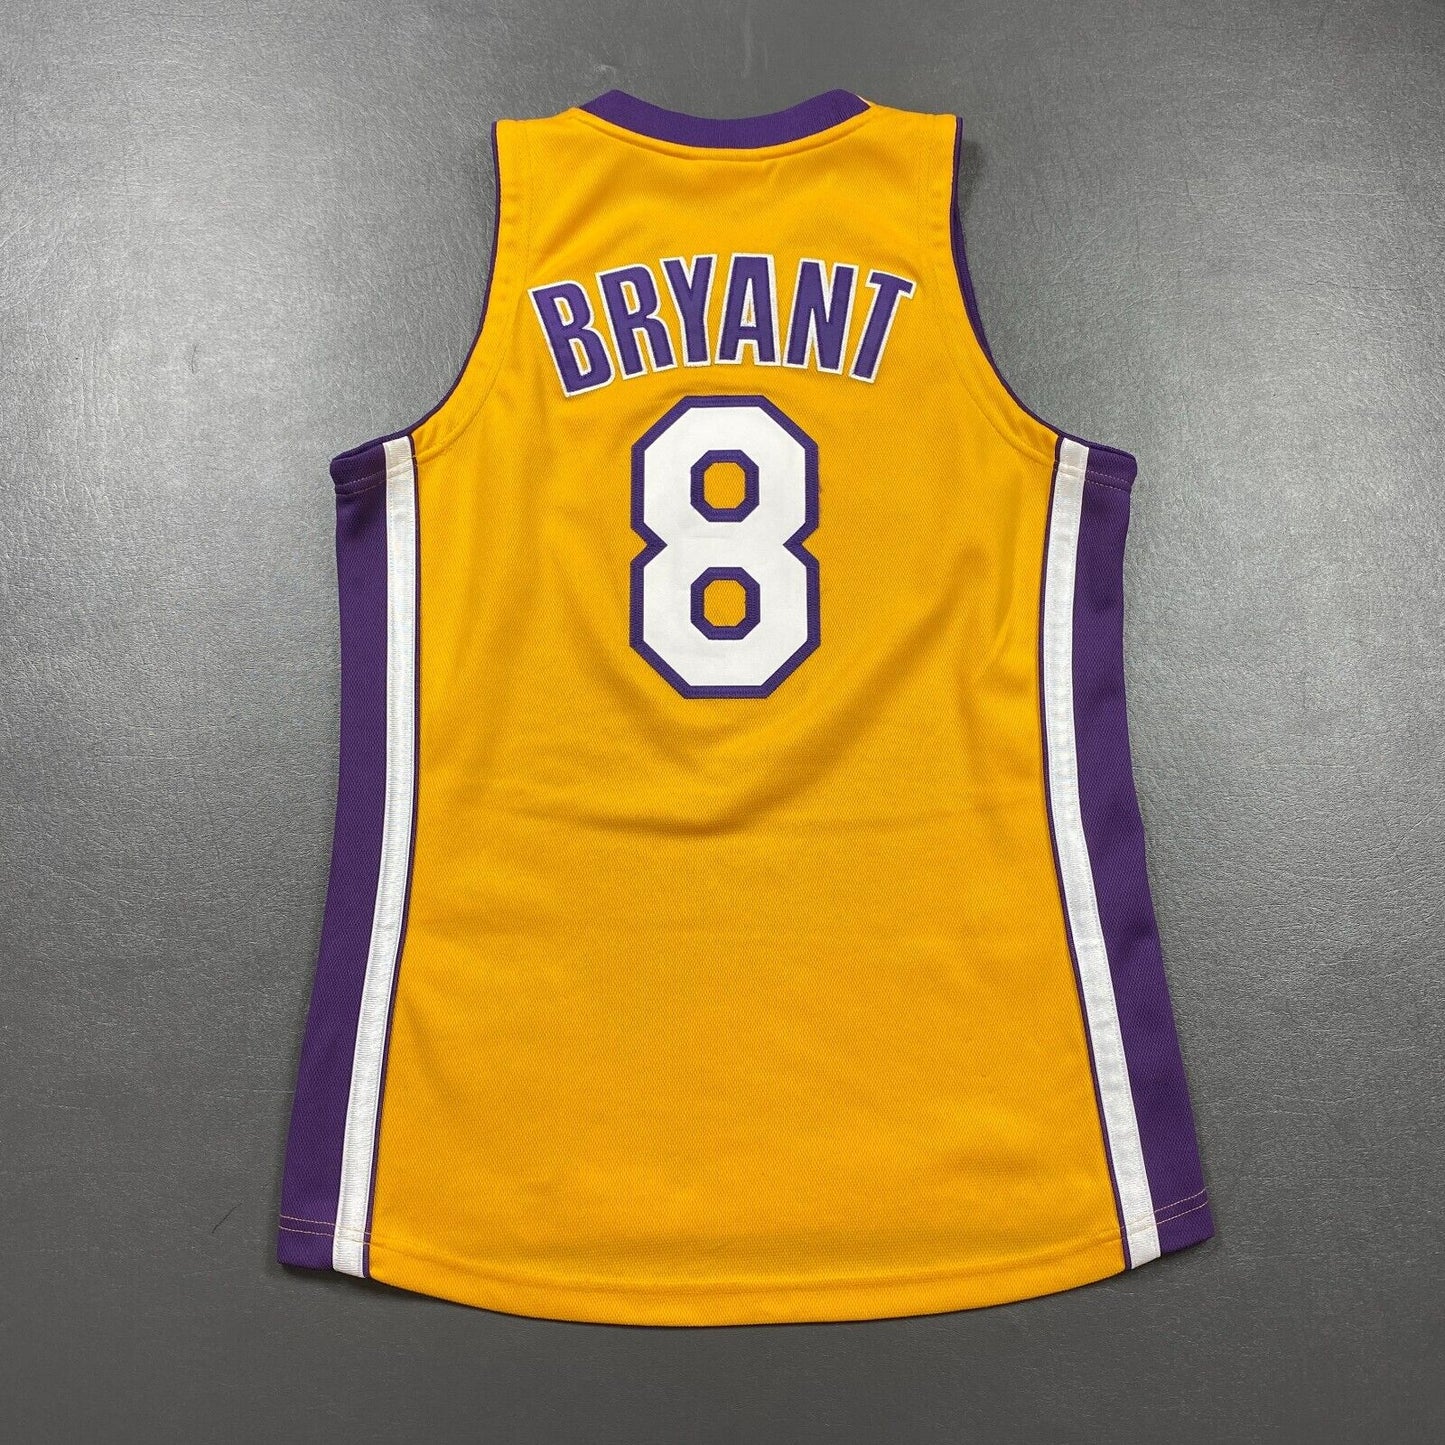 100% Authentic Kobe Bryant Mitchell Ness 00 01 Finals Lakers Jersey Size 40 M